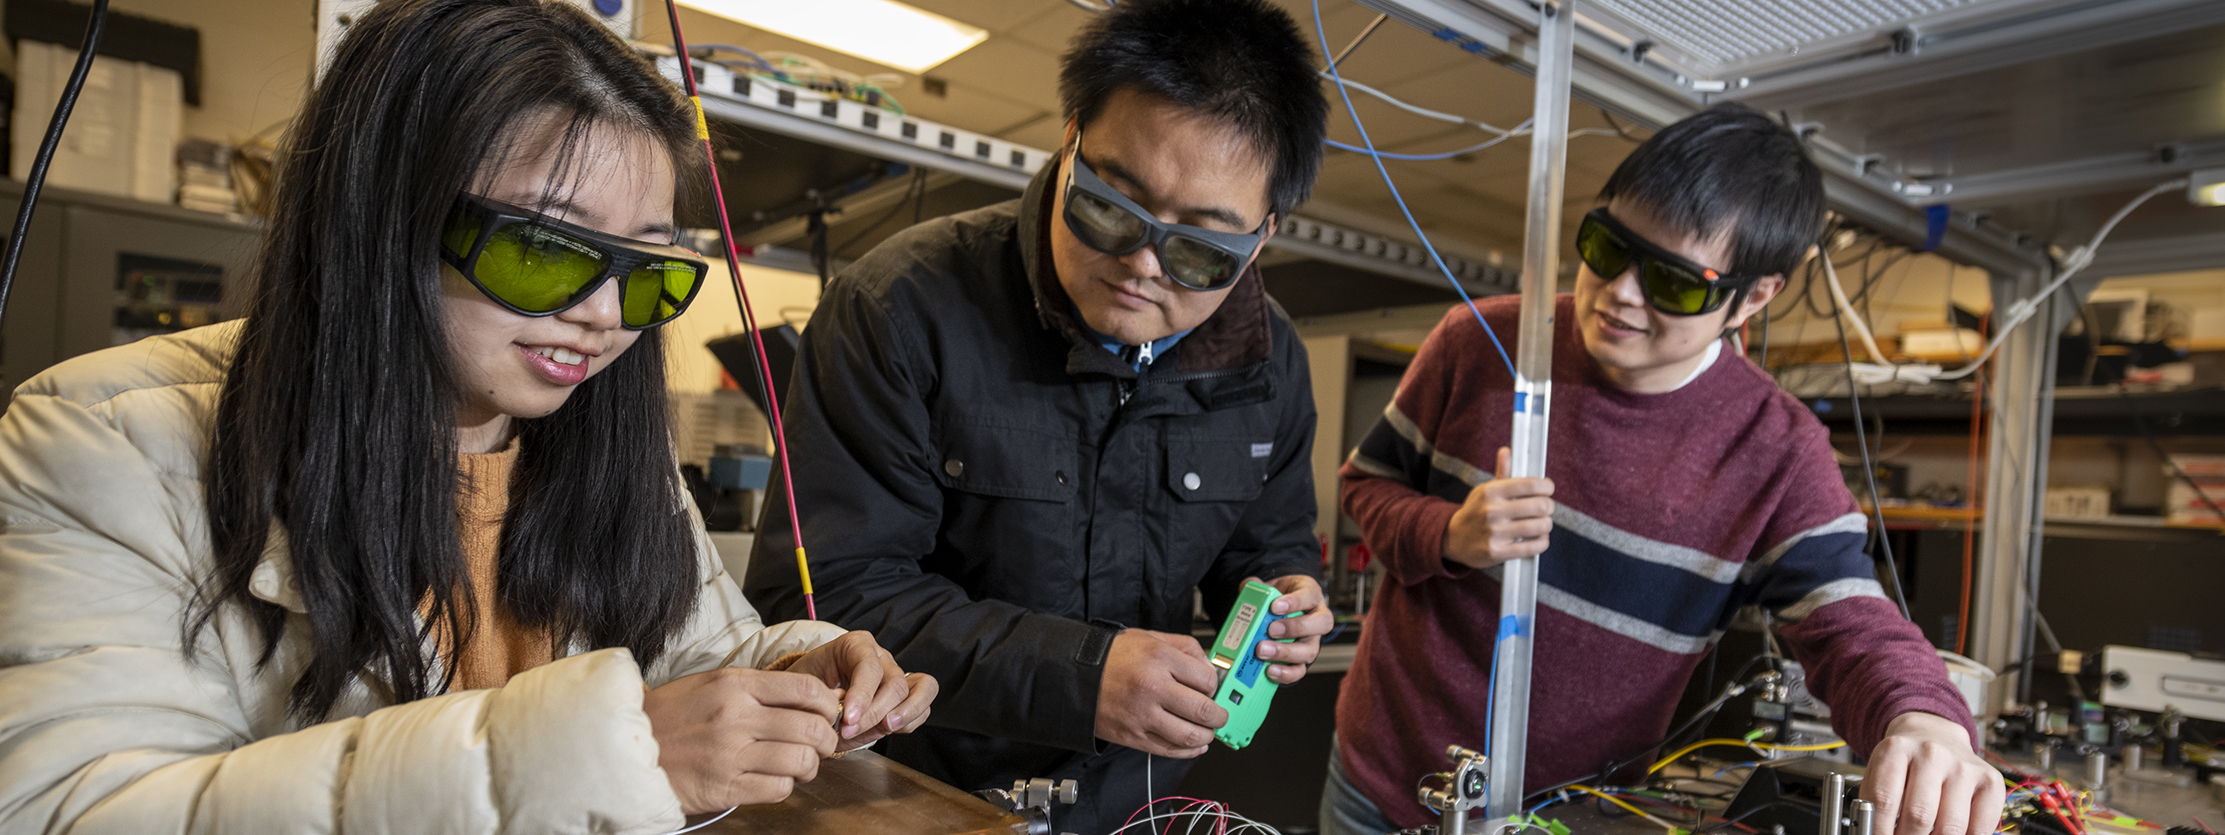 Scientists make adjustments to the optics of a laser in the Berkeley Accelerator Controls and Instrumentation Program Laser Lab.